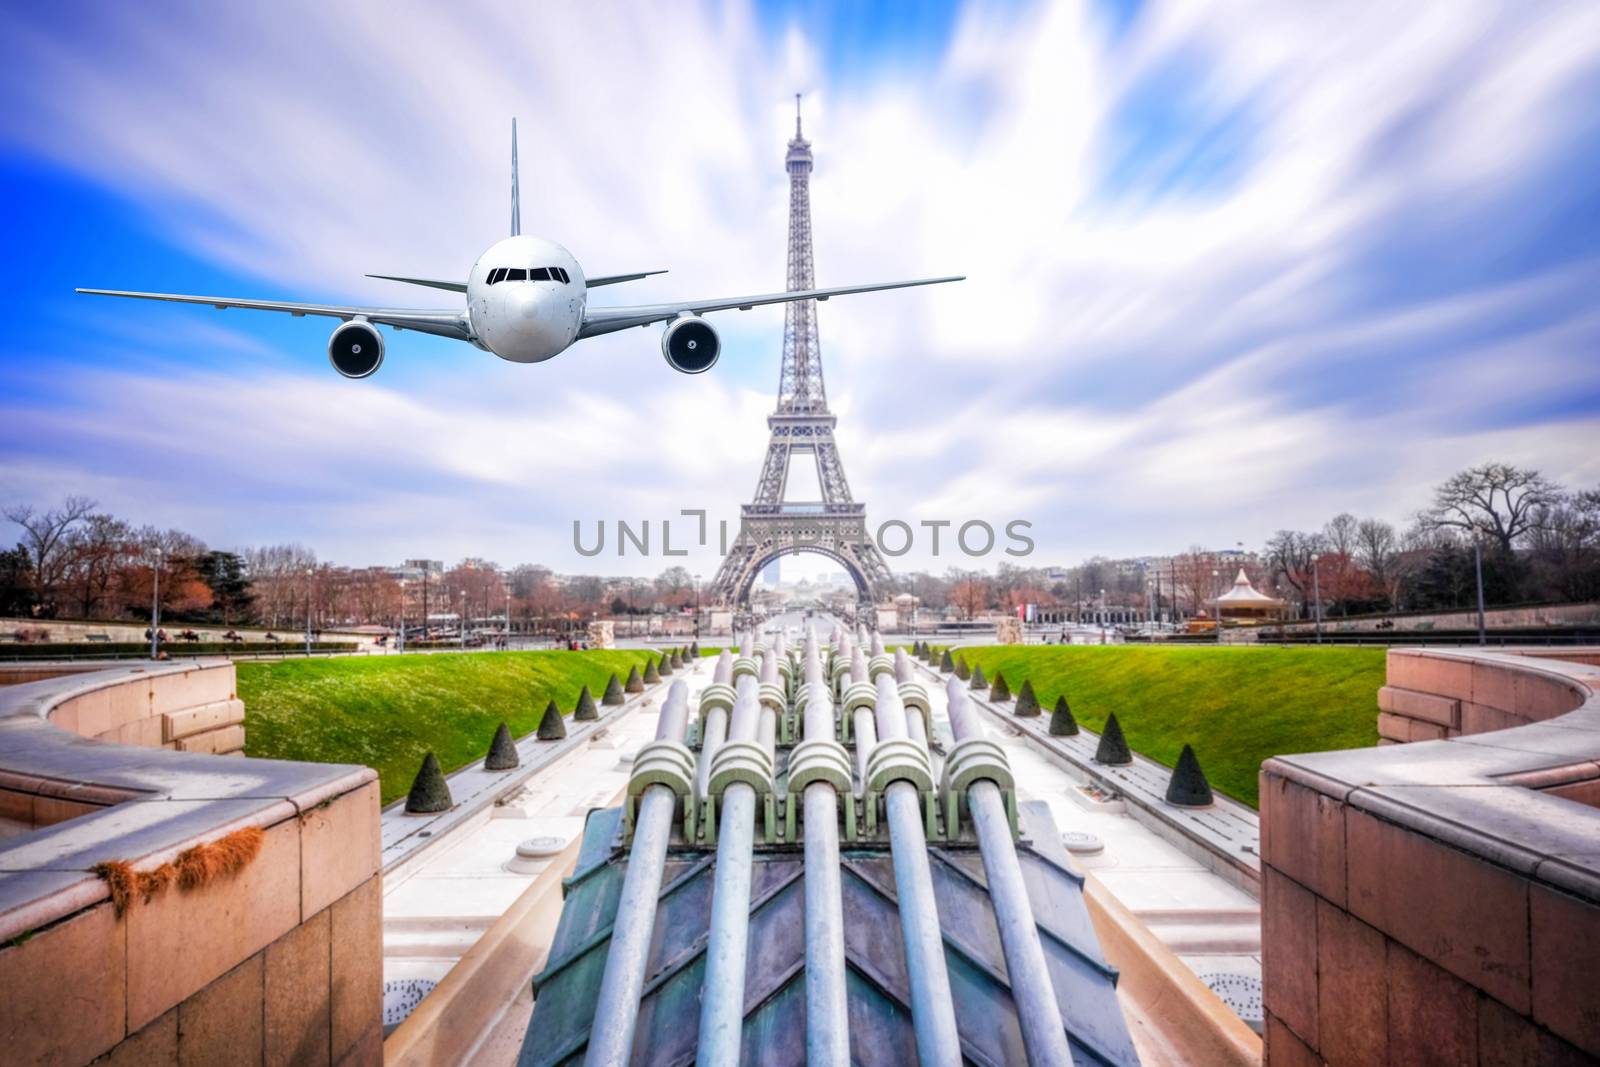 Front of real plane aircraft, on Eiffel Tower in Morning at Pari by Surasak